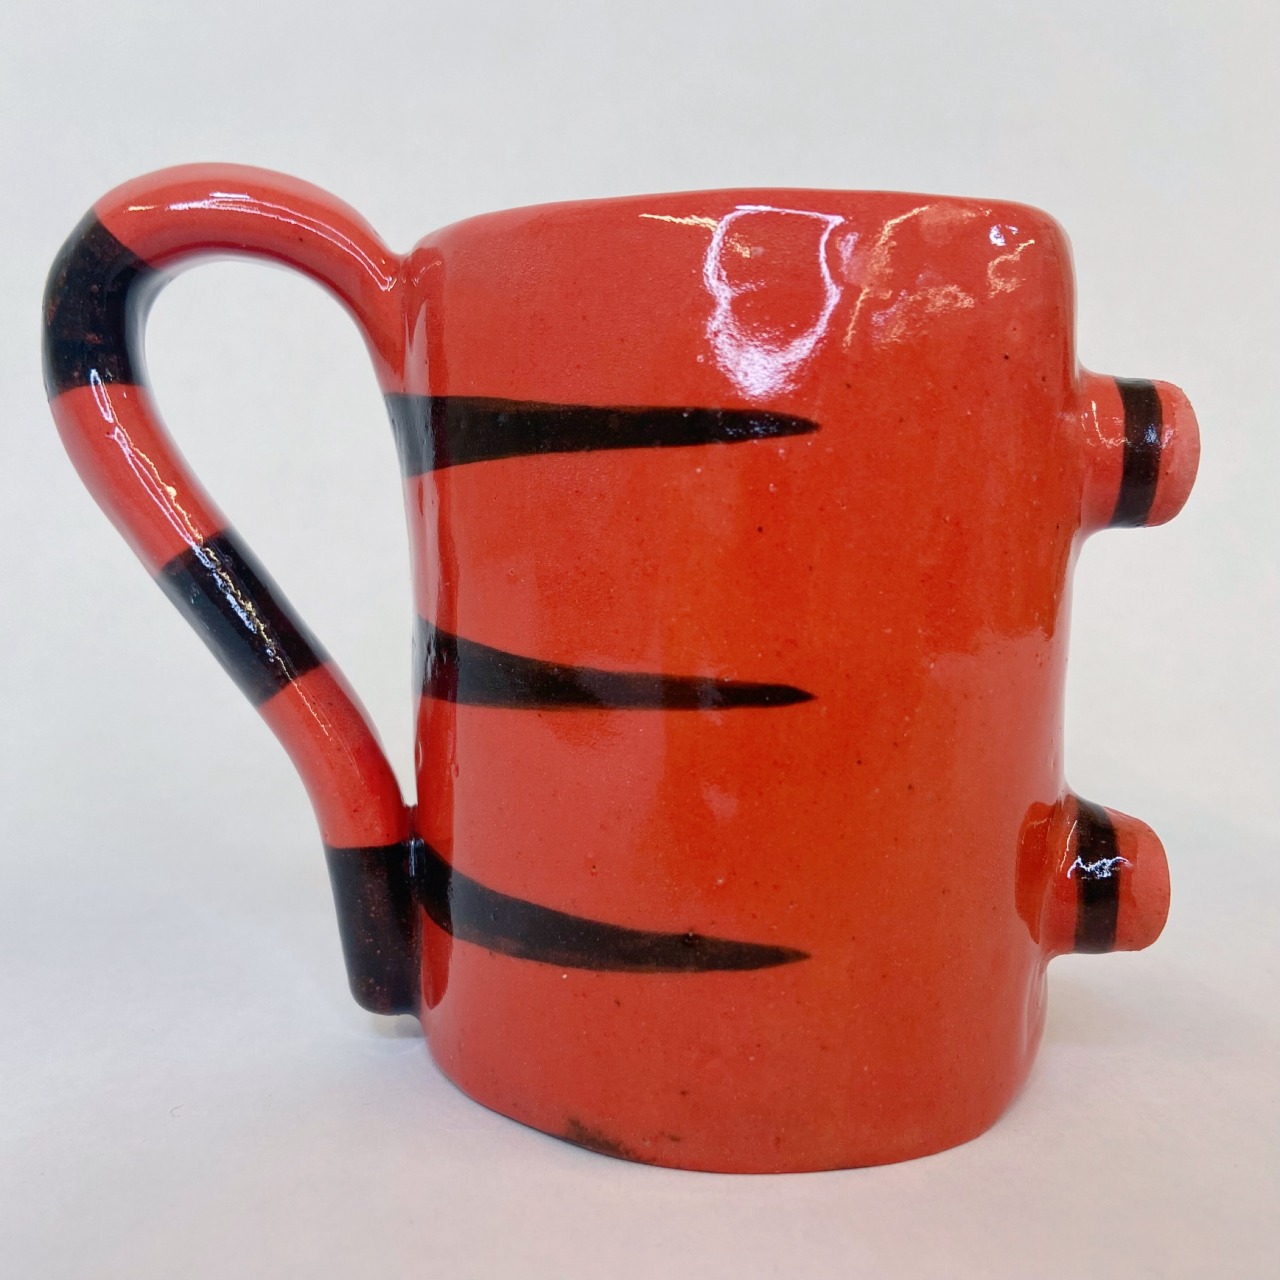 The mug laid out like how a regular mug would sit. The silhouette shows the tail handle on one side, with the feet on the other side.